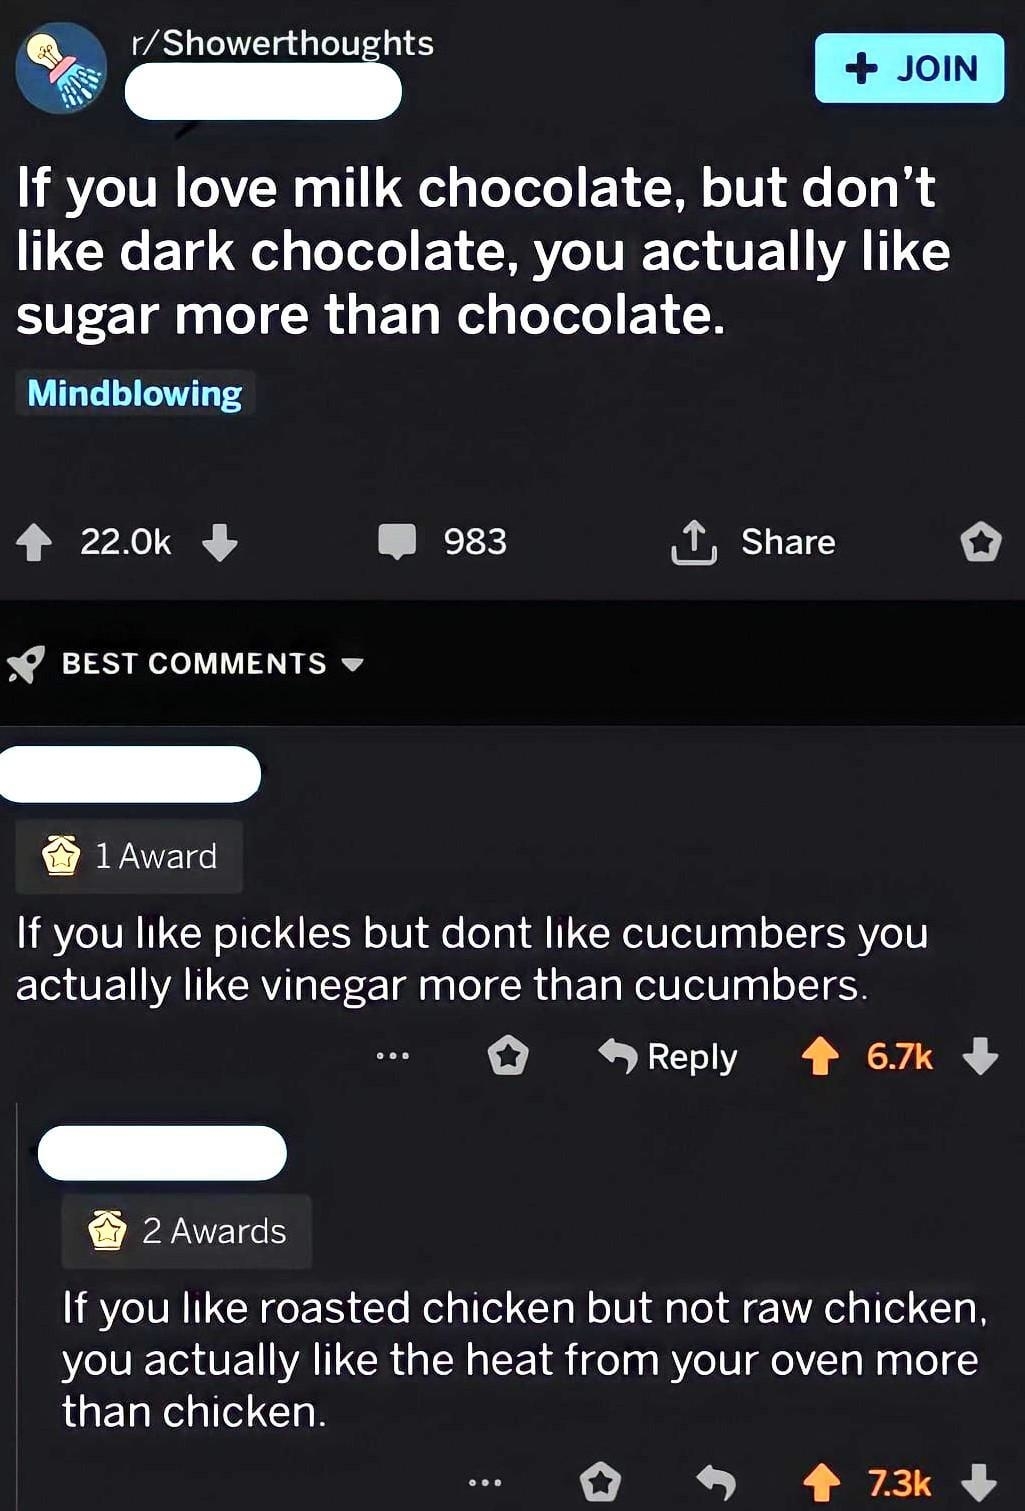 &quot;If you love milk chocolate but don&#x27;t like dark chocolate, you actually like sugar more than chocolate&quot;; response: &quot;If you like pickles but don&#x27;t like cucumbers, you actually like vinegar more than cucumbers&quot;